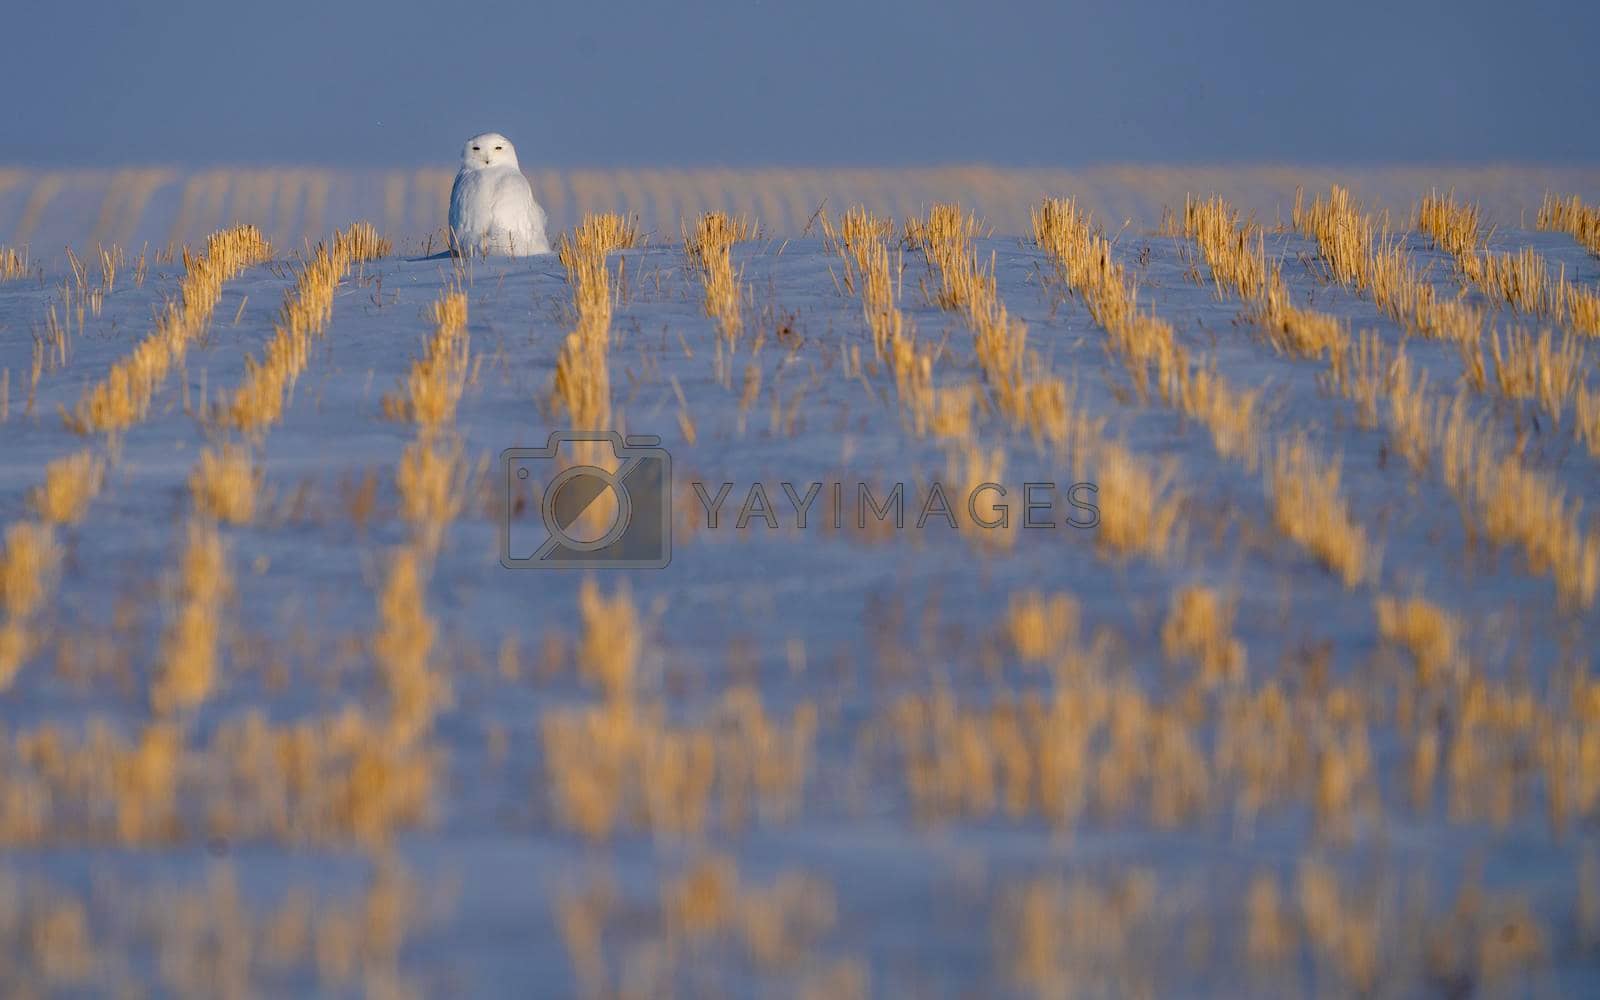 Royalty free image of Snowy Owl WInter by pictureguy